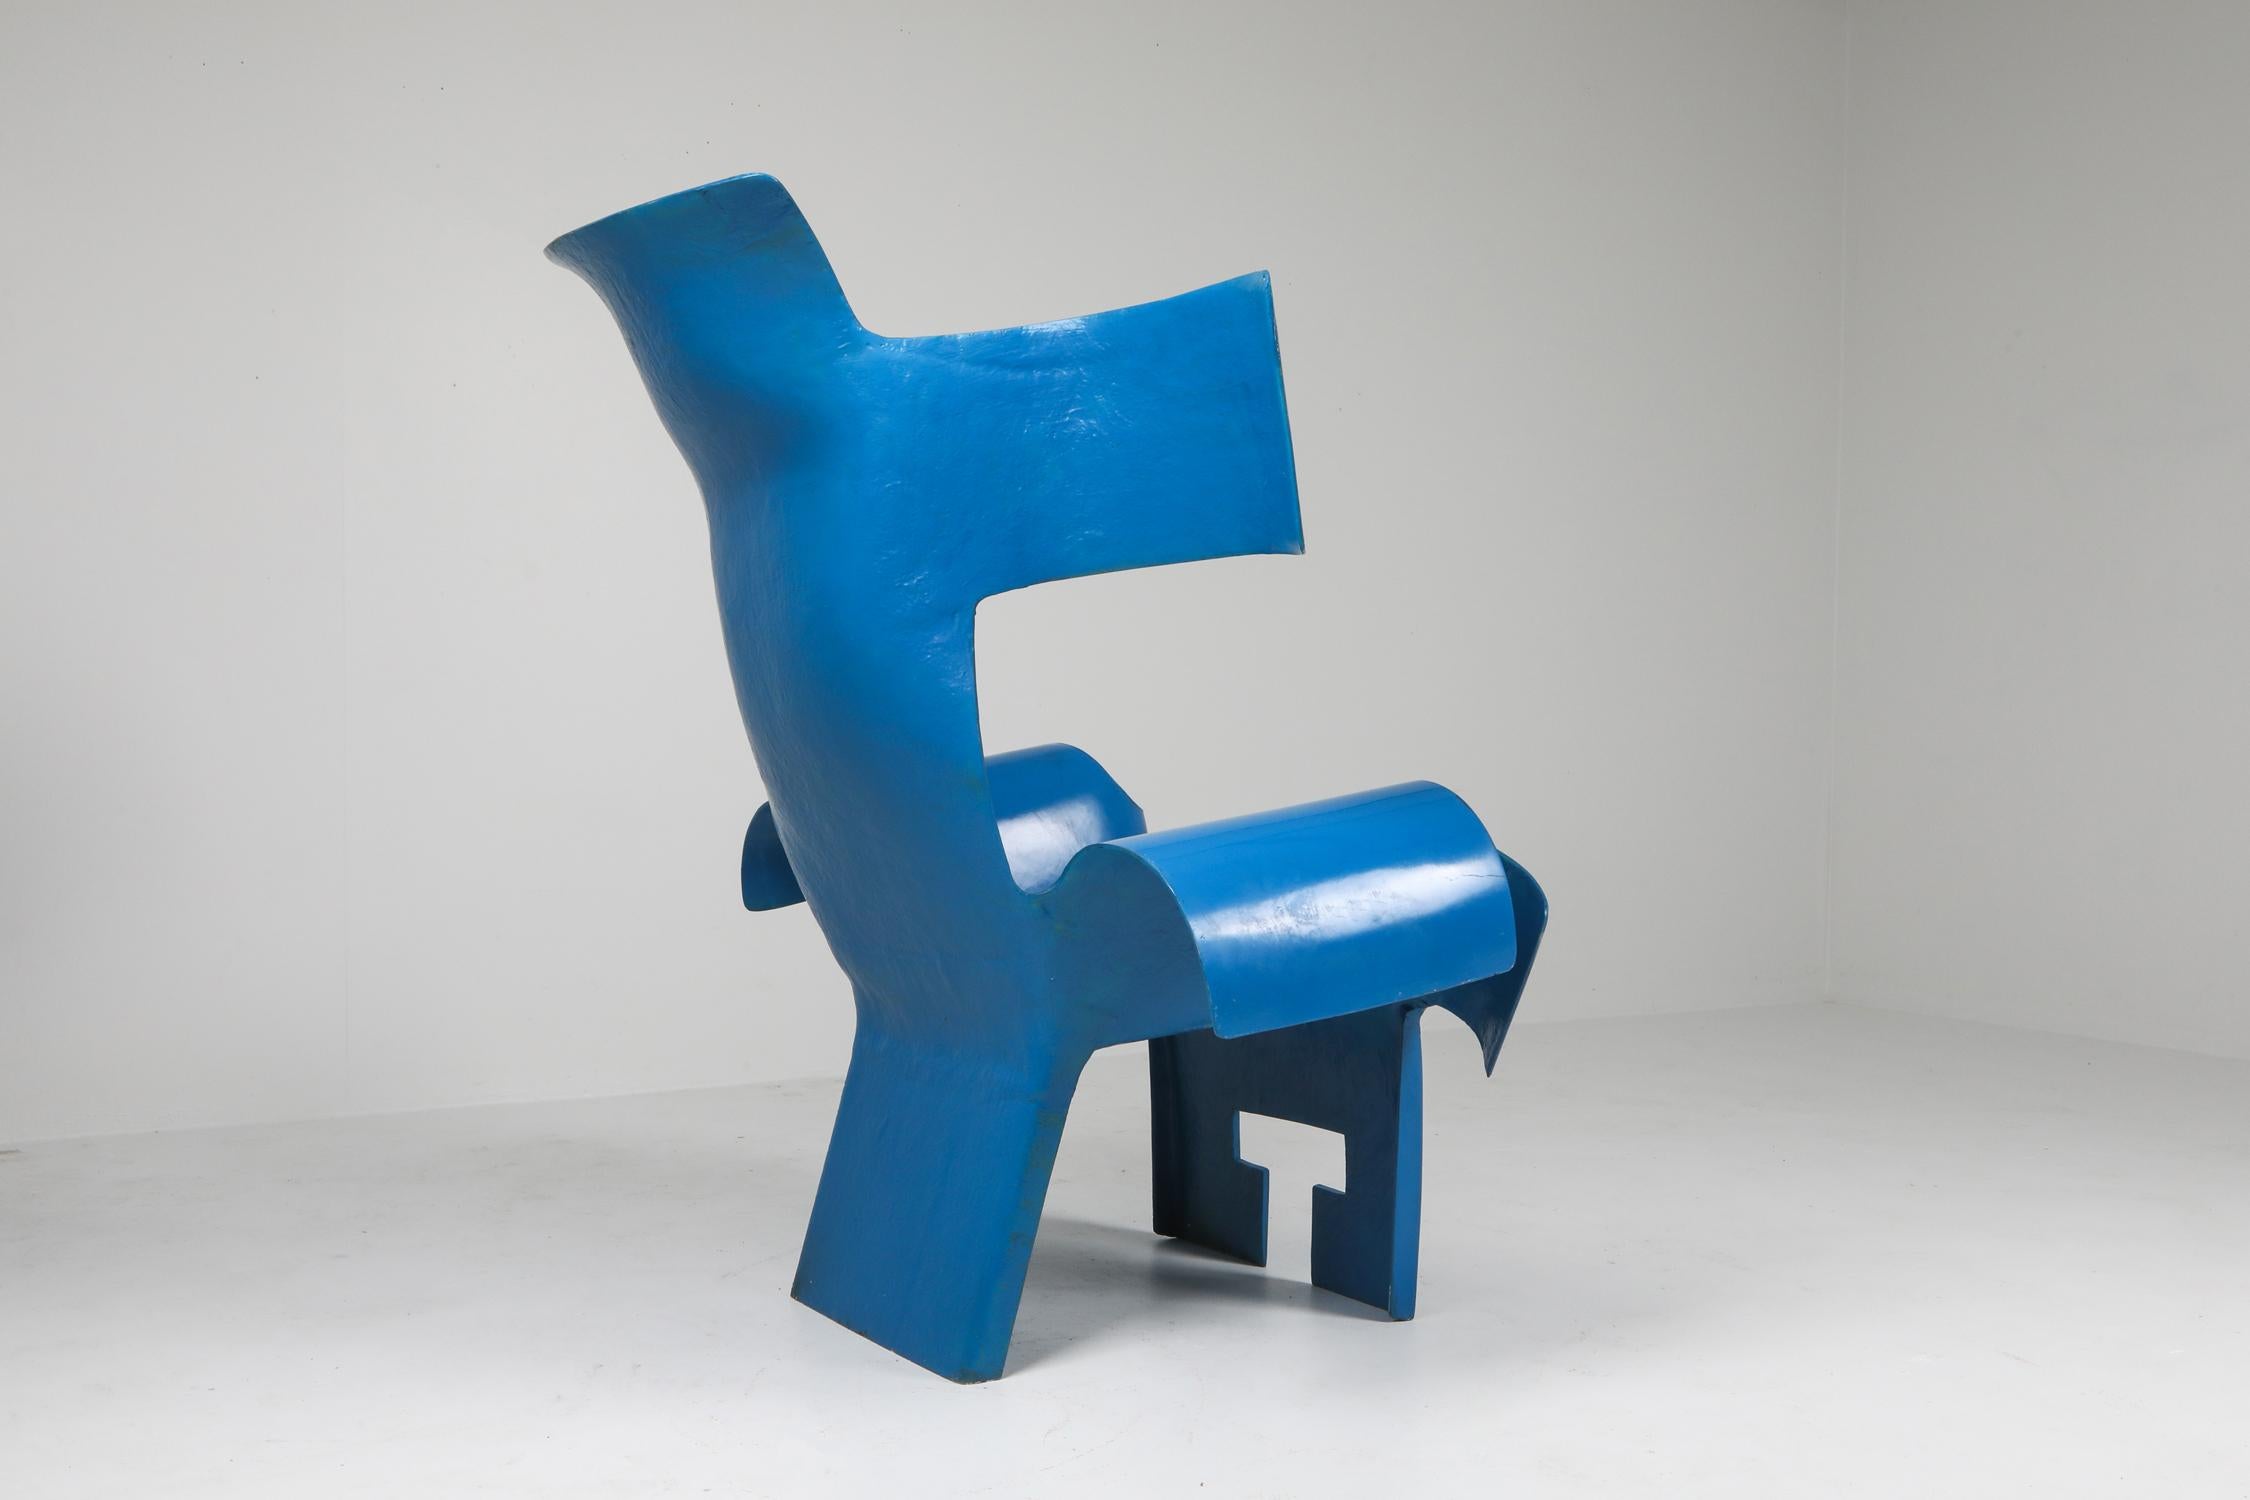 20th Century Functional Art Chair in the Style of Gaetano Pesce